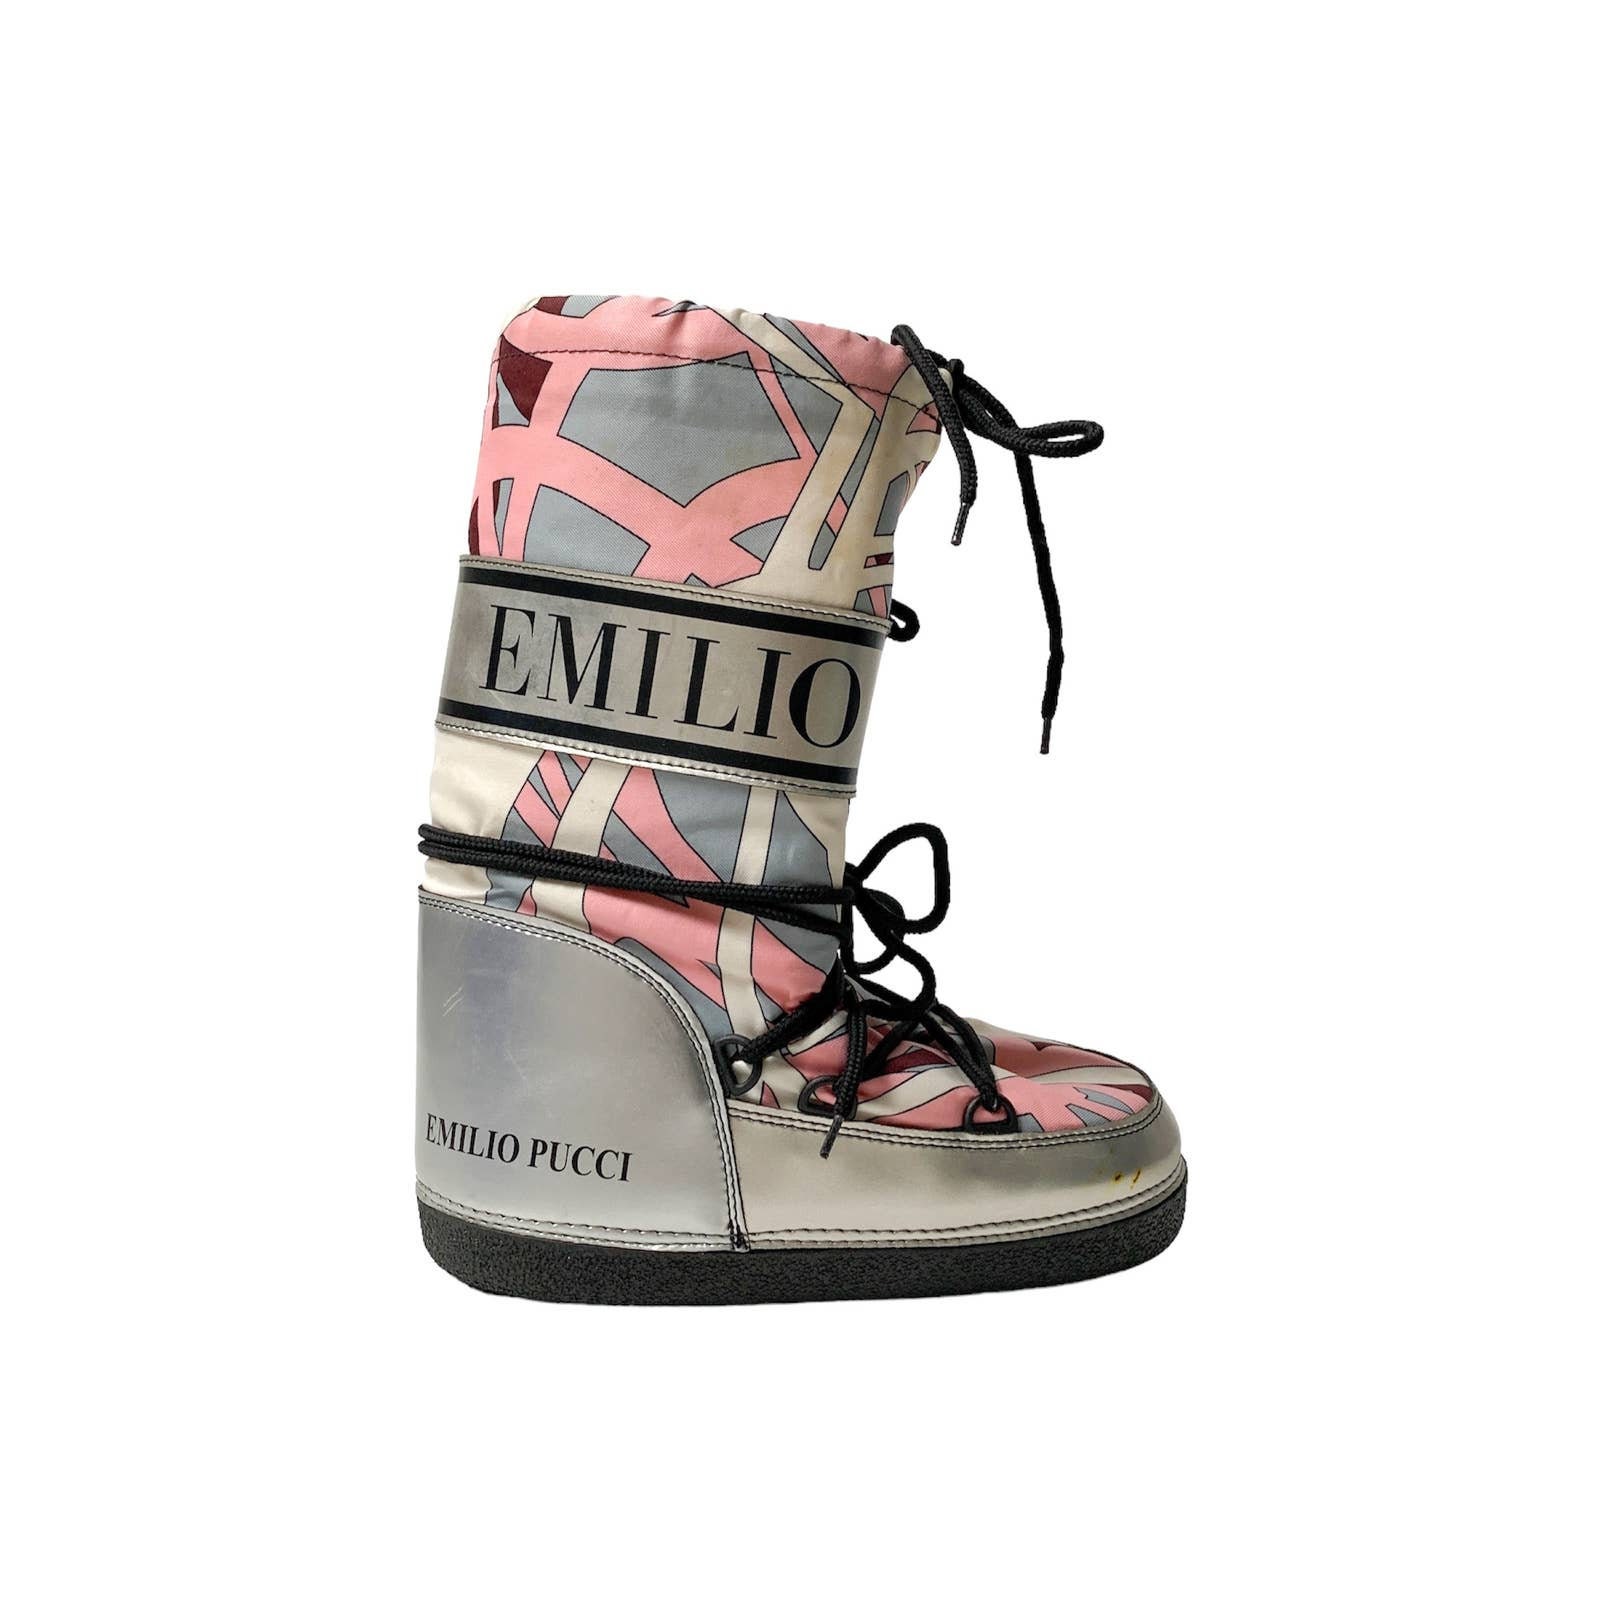 Emilio Pucci Printed Moon Boots - Boots, Shoes - EMI32049